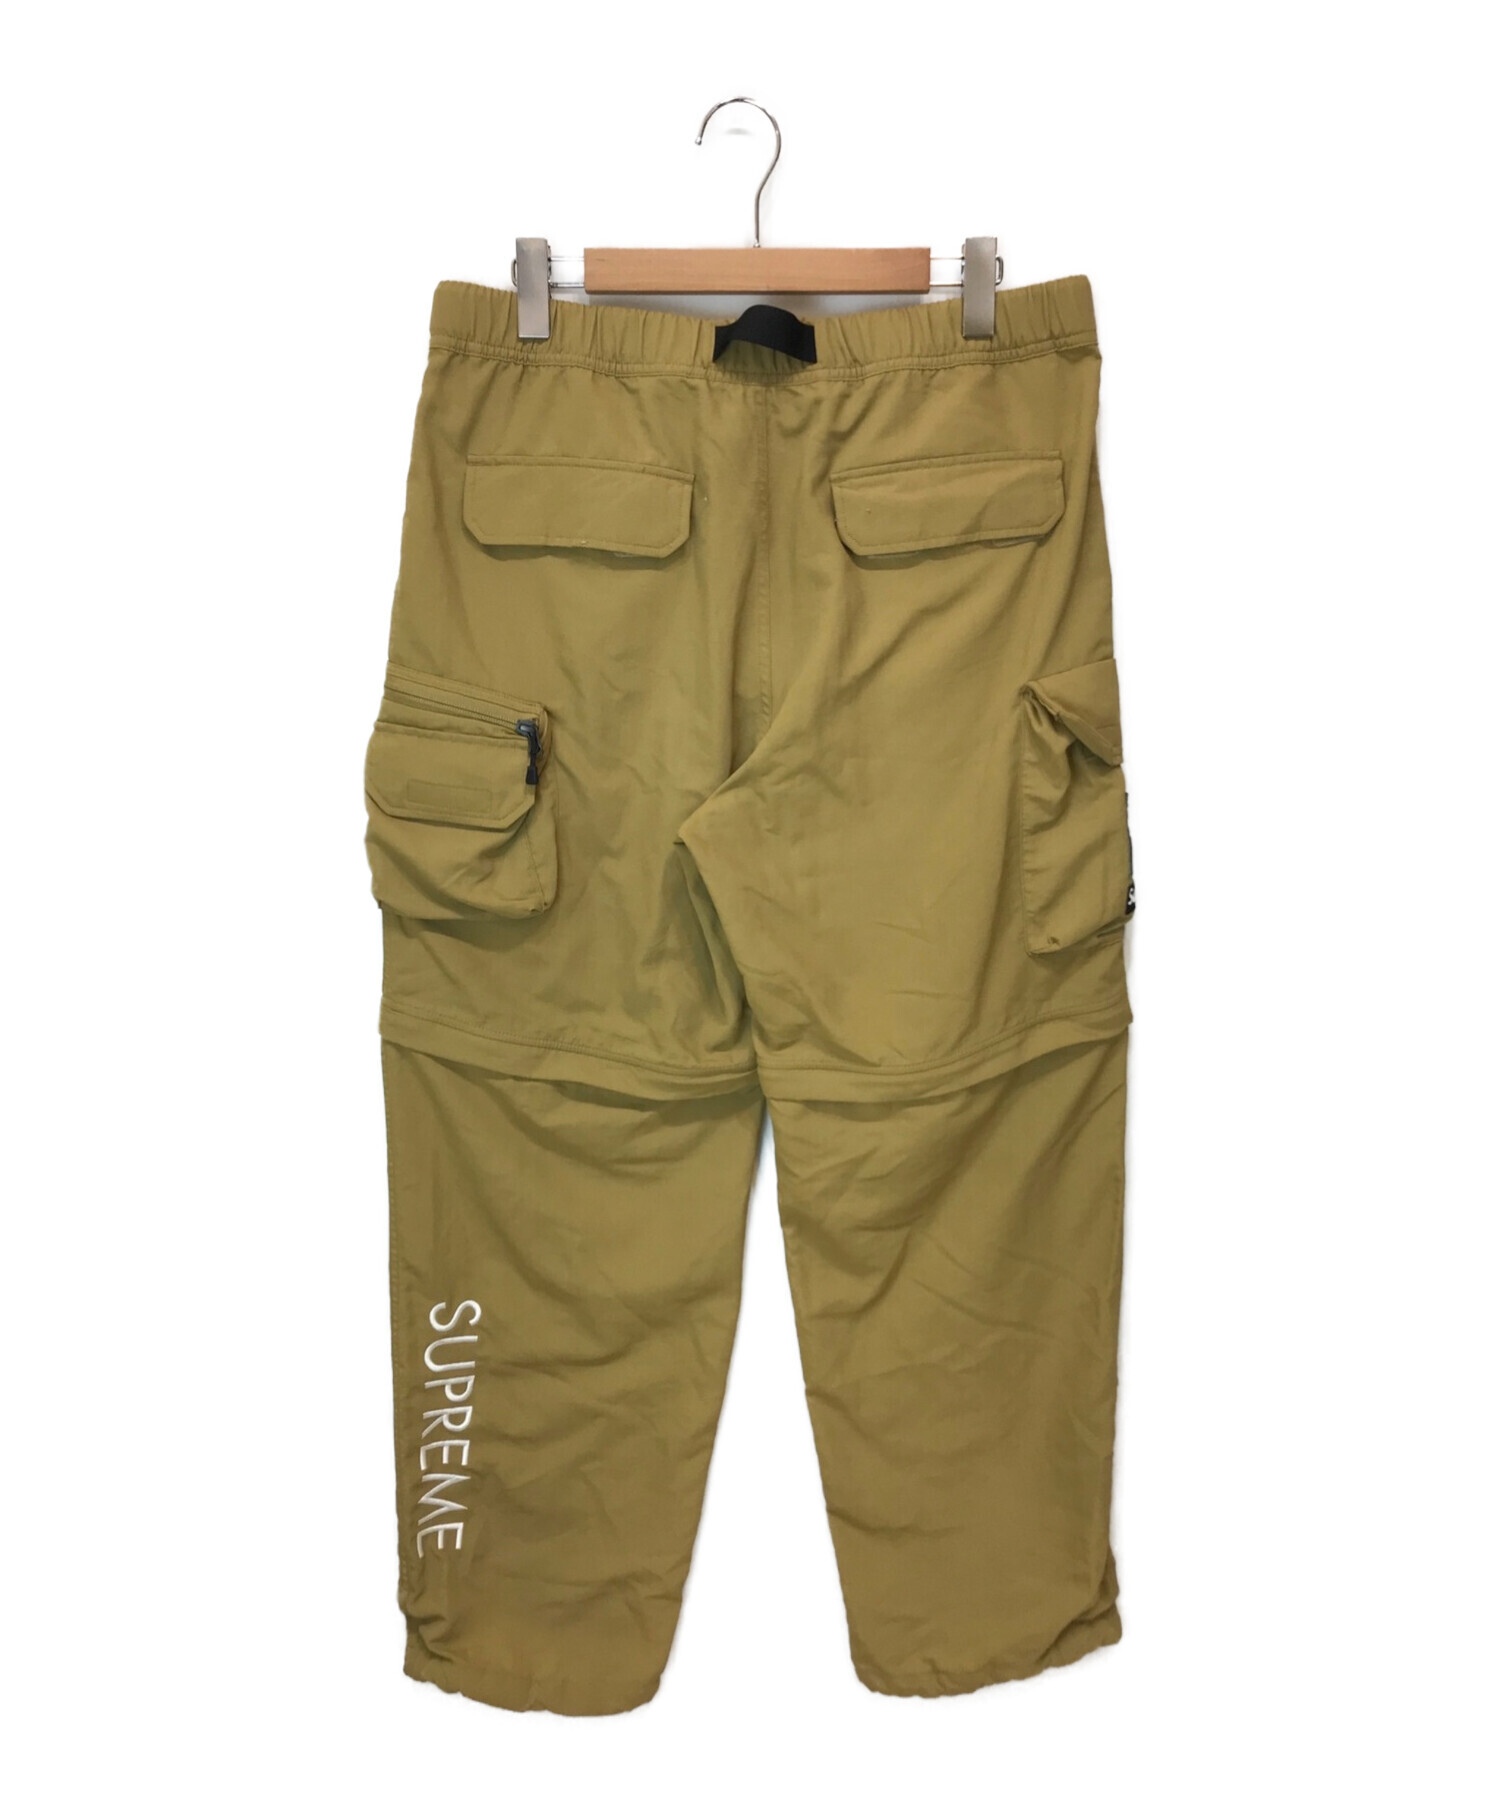 supreme×northface belted cargo pants Lパンツ